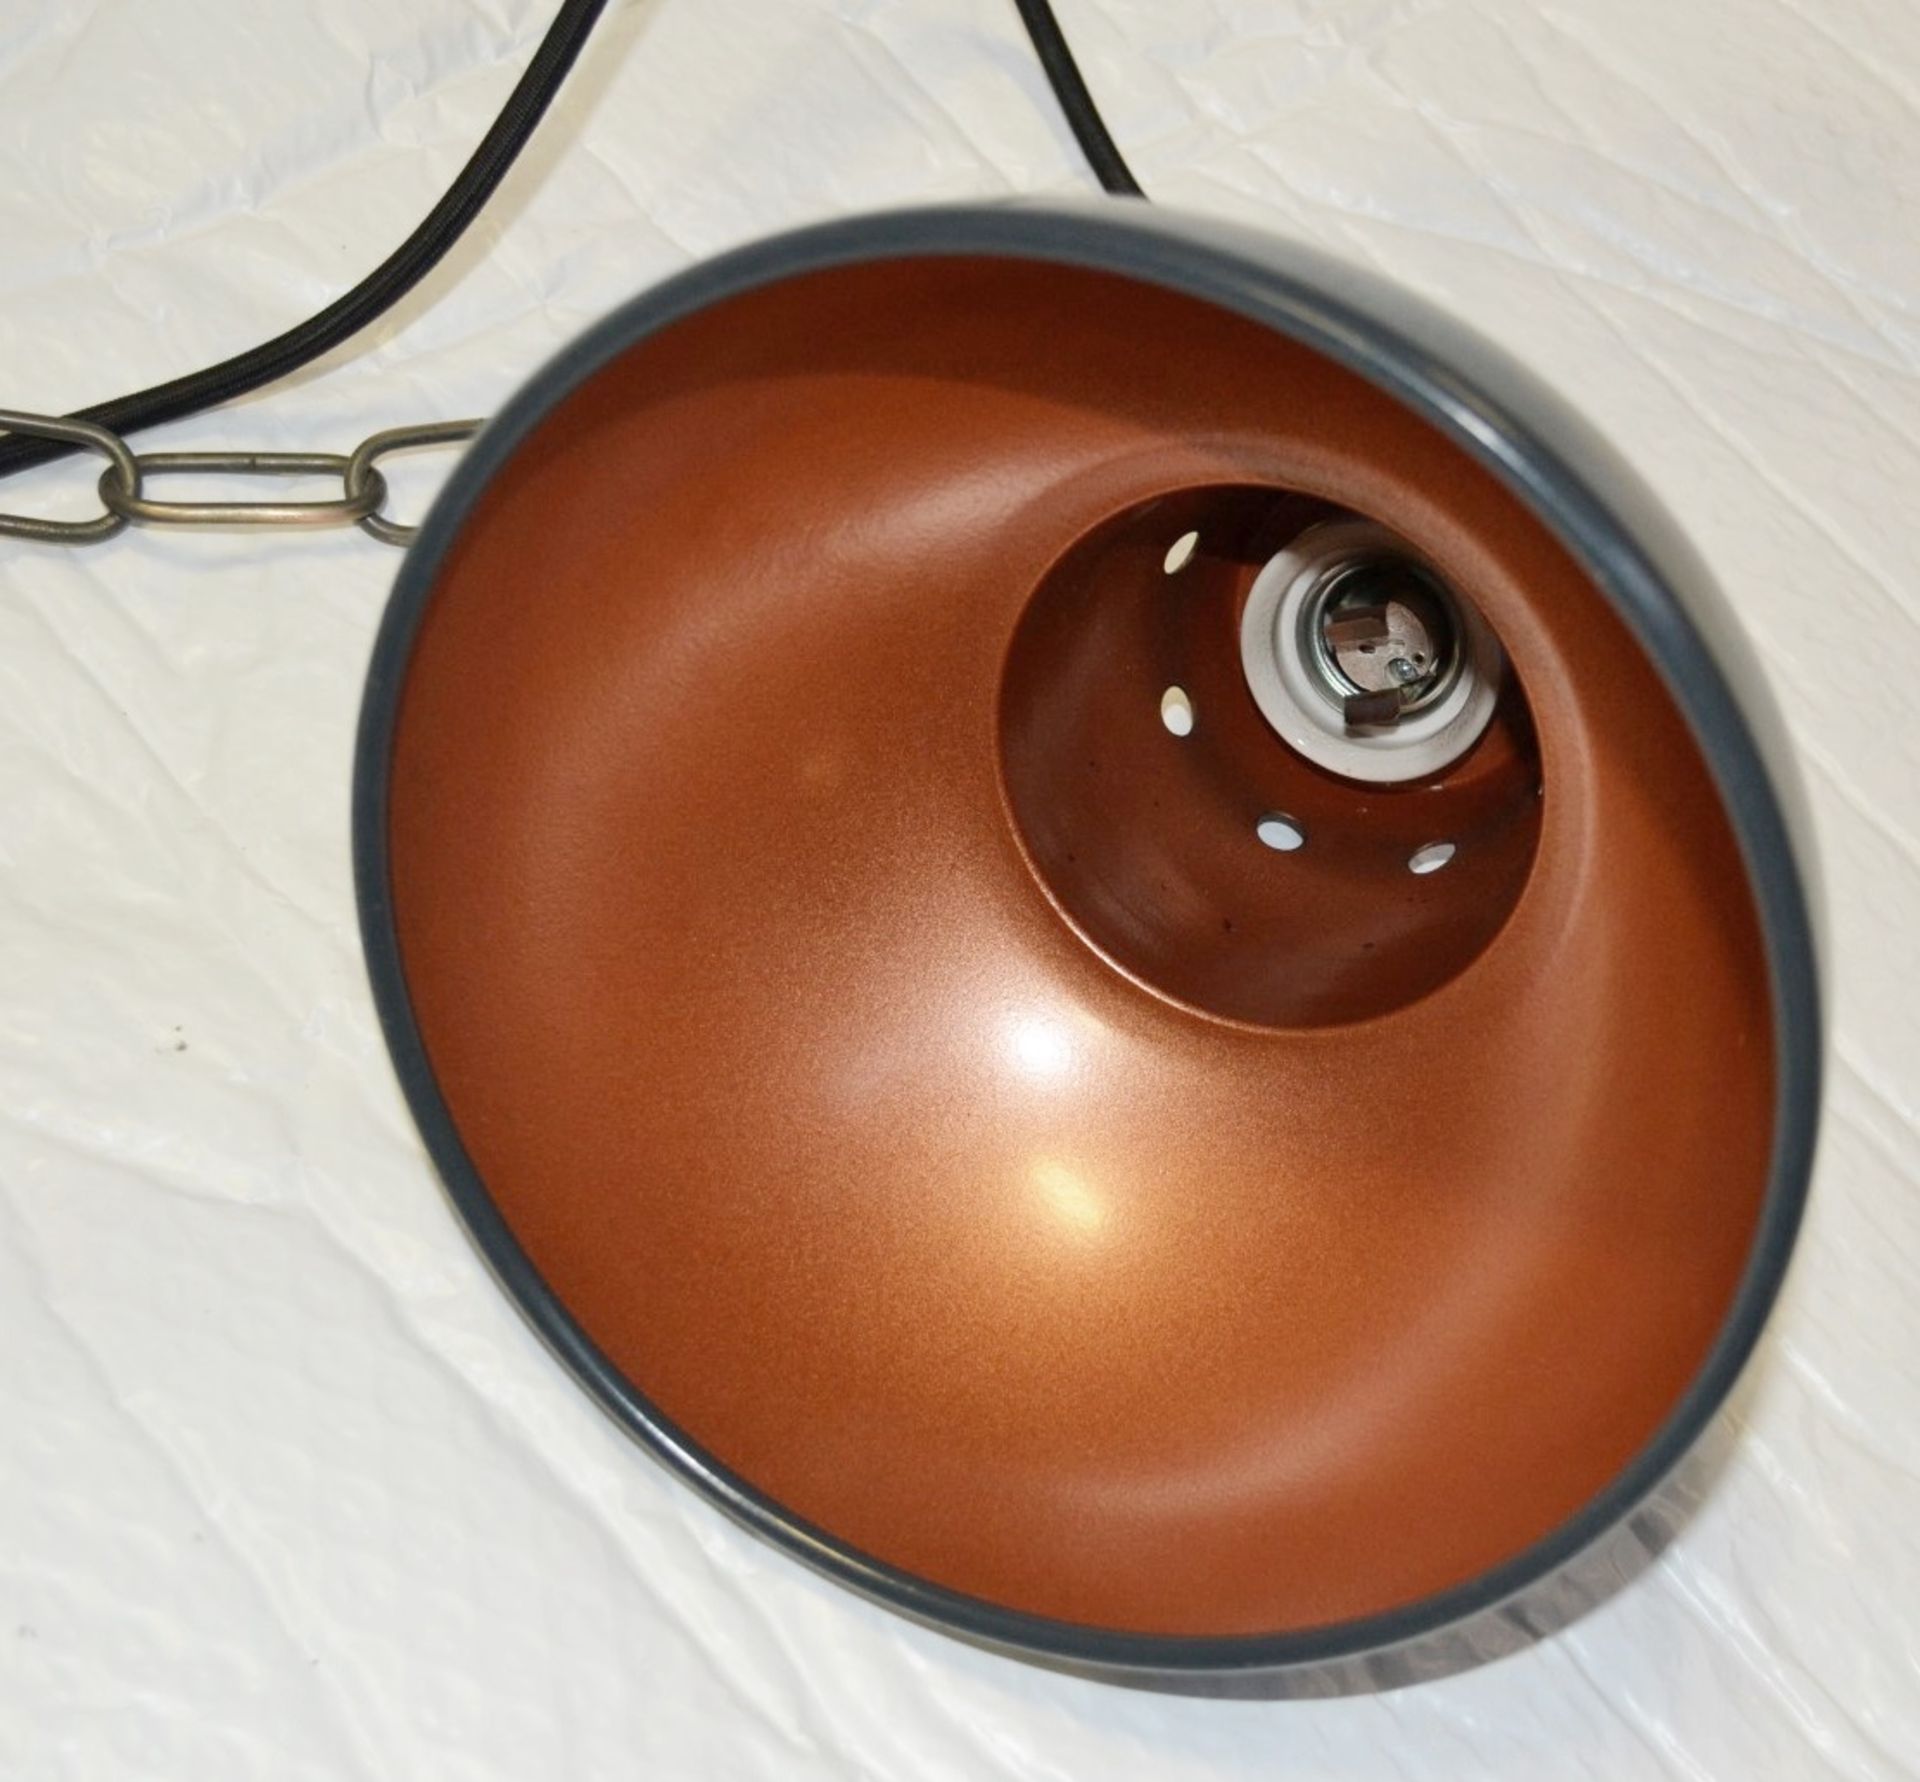 2 x Small Dome Pendant Ceiling Light Fittings With Chain And Black Fabric Flex - Dark Grey / Copper - Image 2 of 4